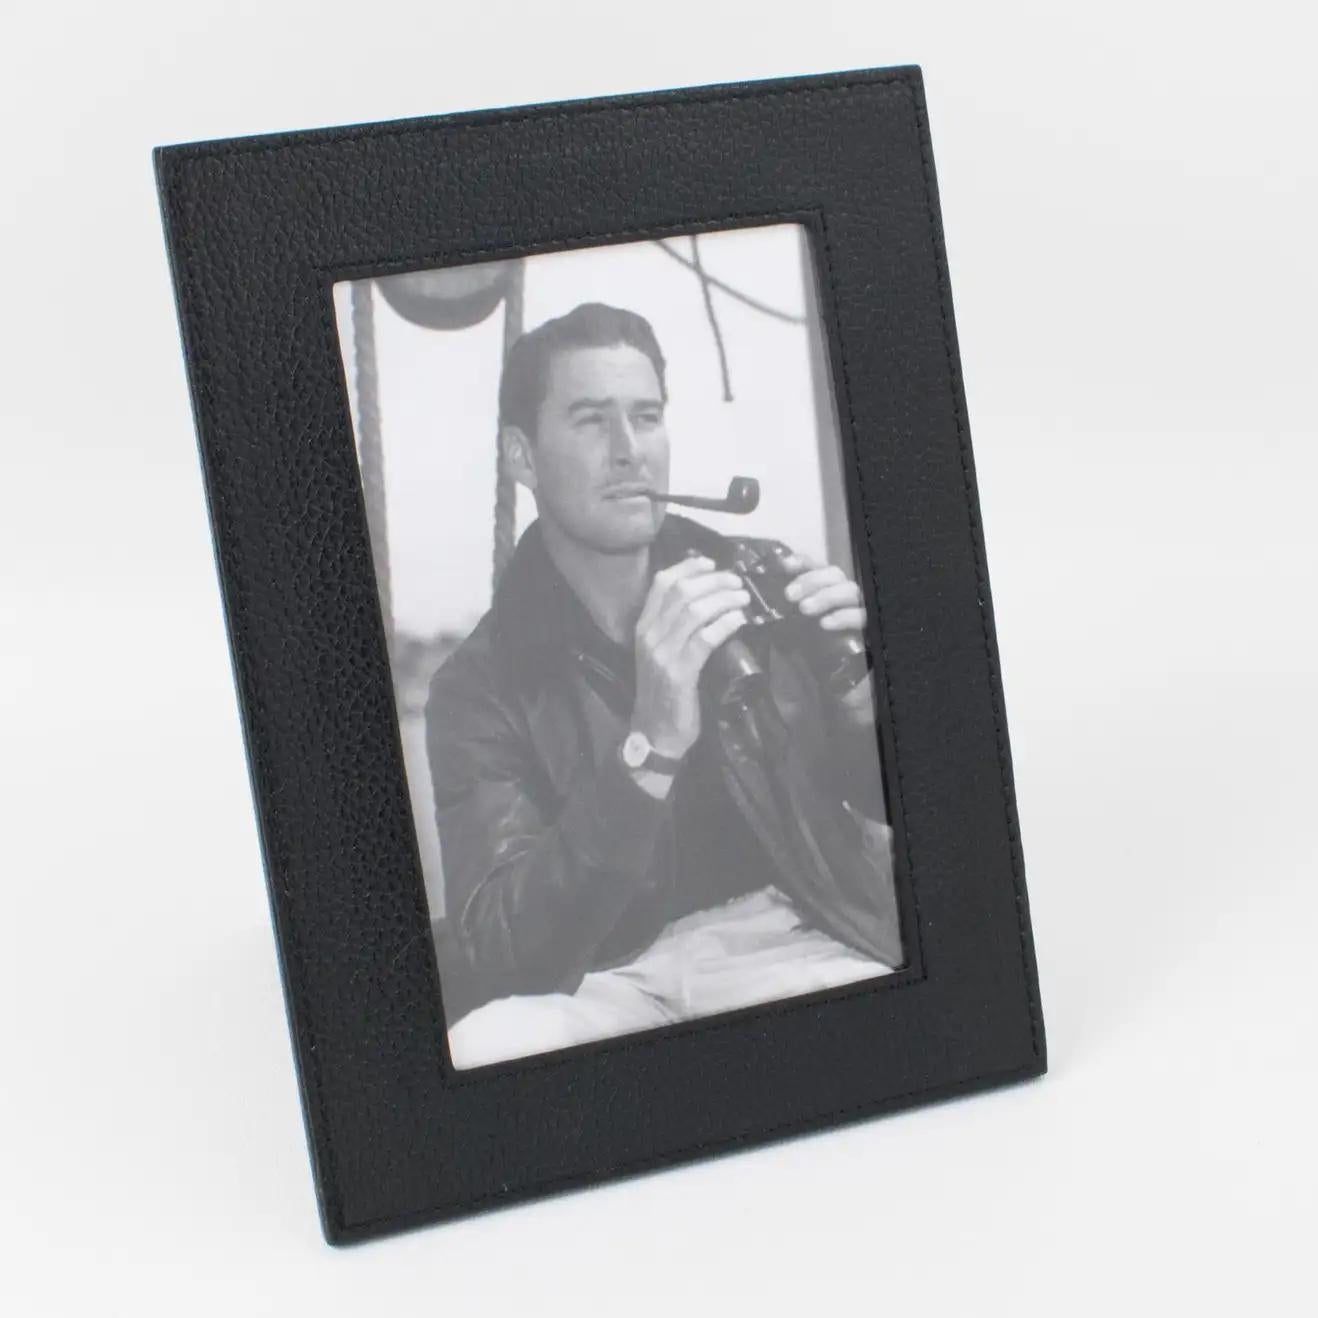 Longchamp, Paris, designed and crafted this elegant modern leather picture photo frame in the 1980s. The black calfskin leather has a pattern and hand-stitched finish. The easel and back are in the same black leather, and the frame has glass